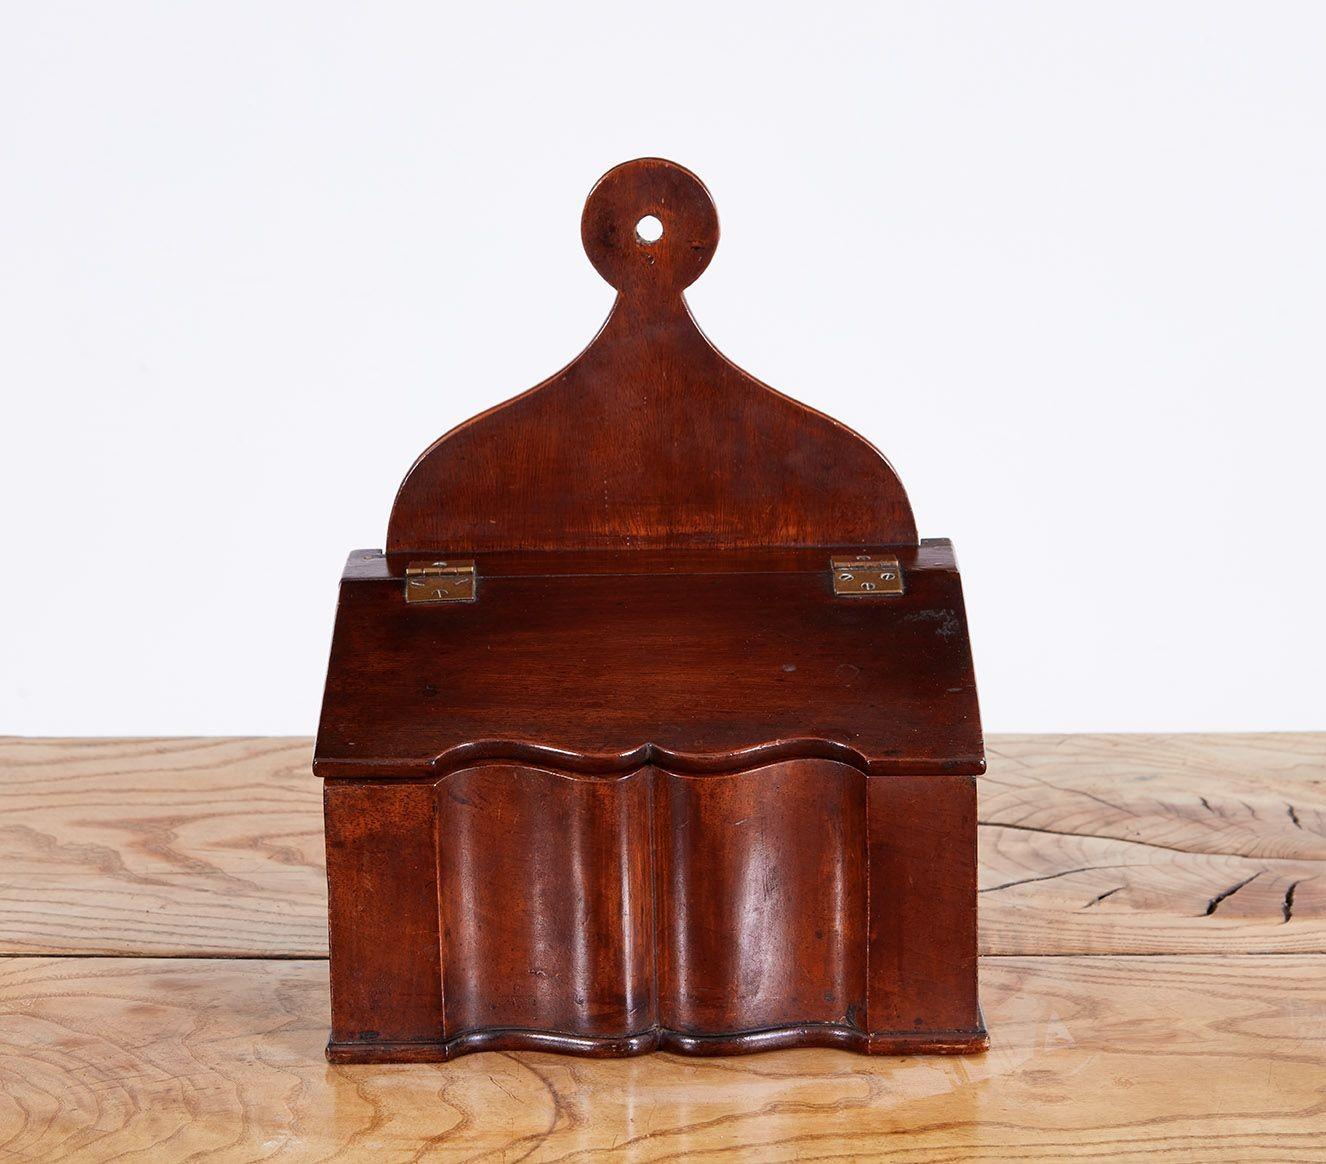 Fine English or American mahogany scalloped wall hanging salt box, having large penny mounting plate over sloped lid, the box with deeply scalloped body and molded base, good old surface and rich patina, original brass hinges. A little gem from an